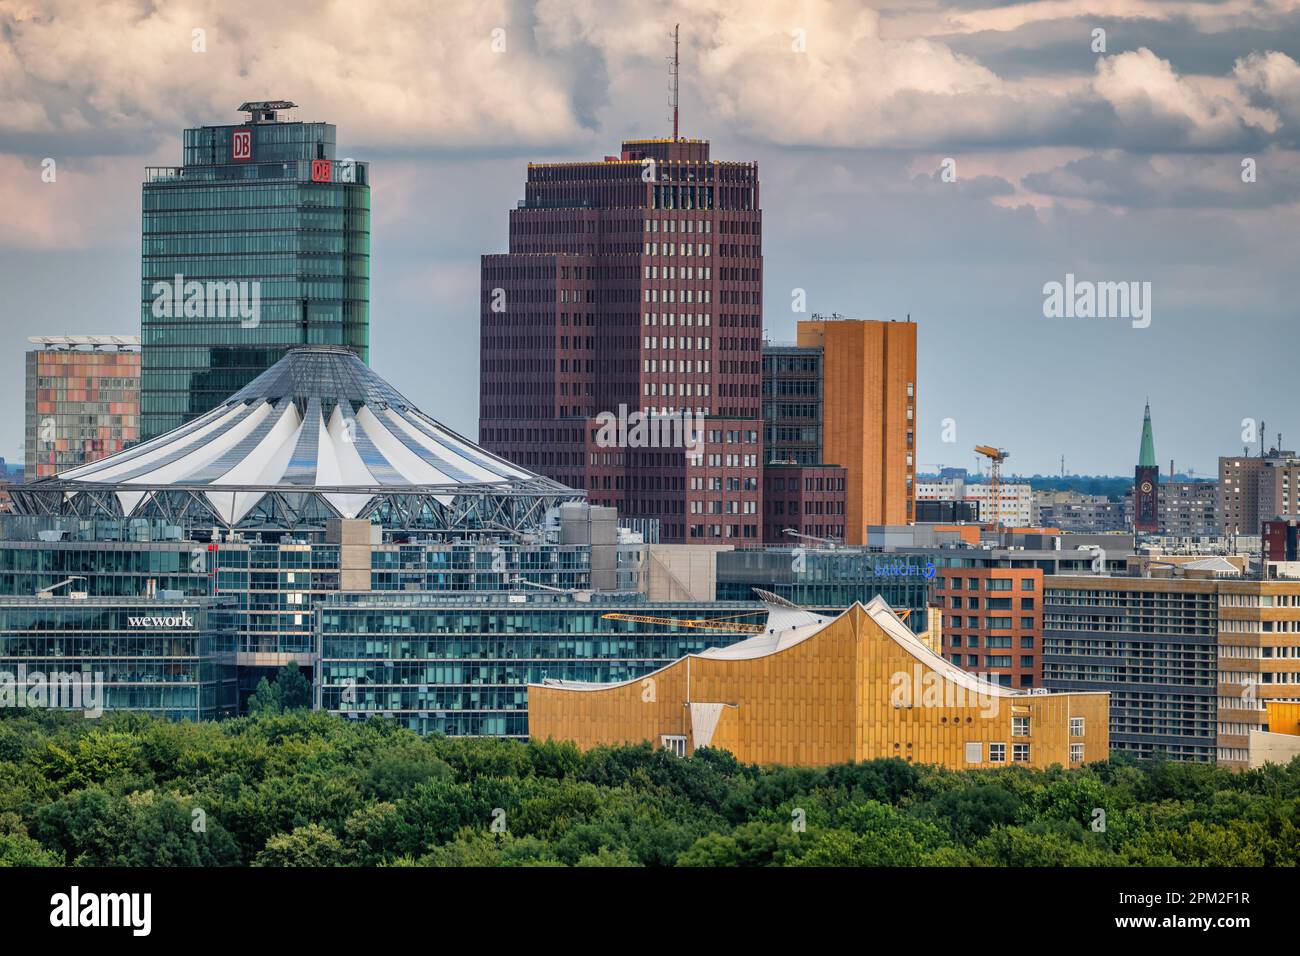 Berlin, Germany - August 4, 2021 - Downtown skyline of the capital city with Sony Center, skyscrapers and Berlin Philharmonic Orchestra building (Berl Stock Photo